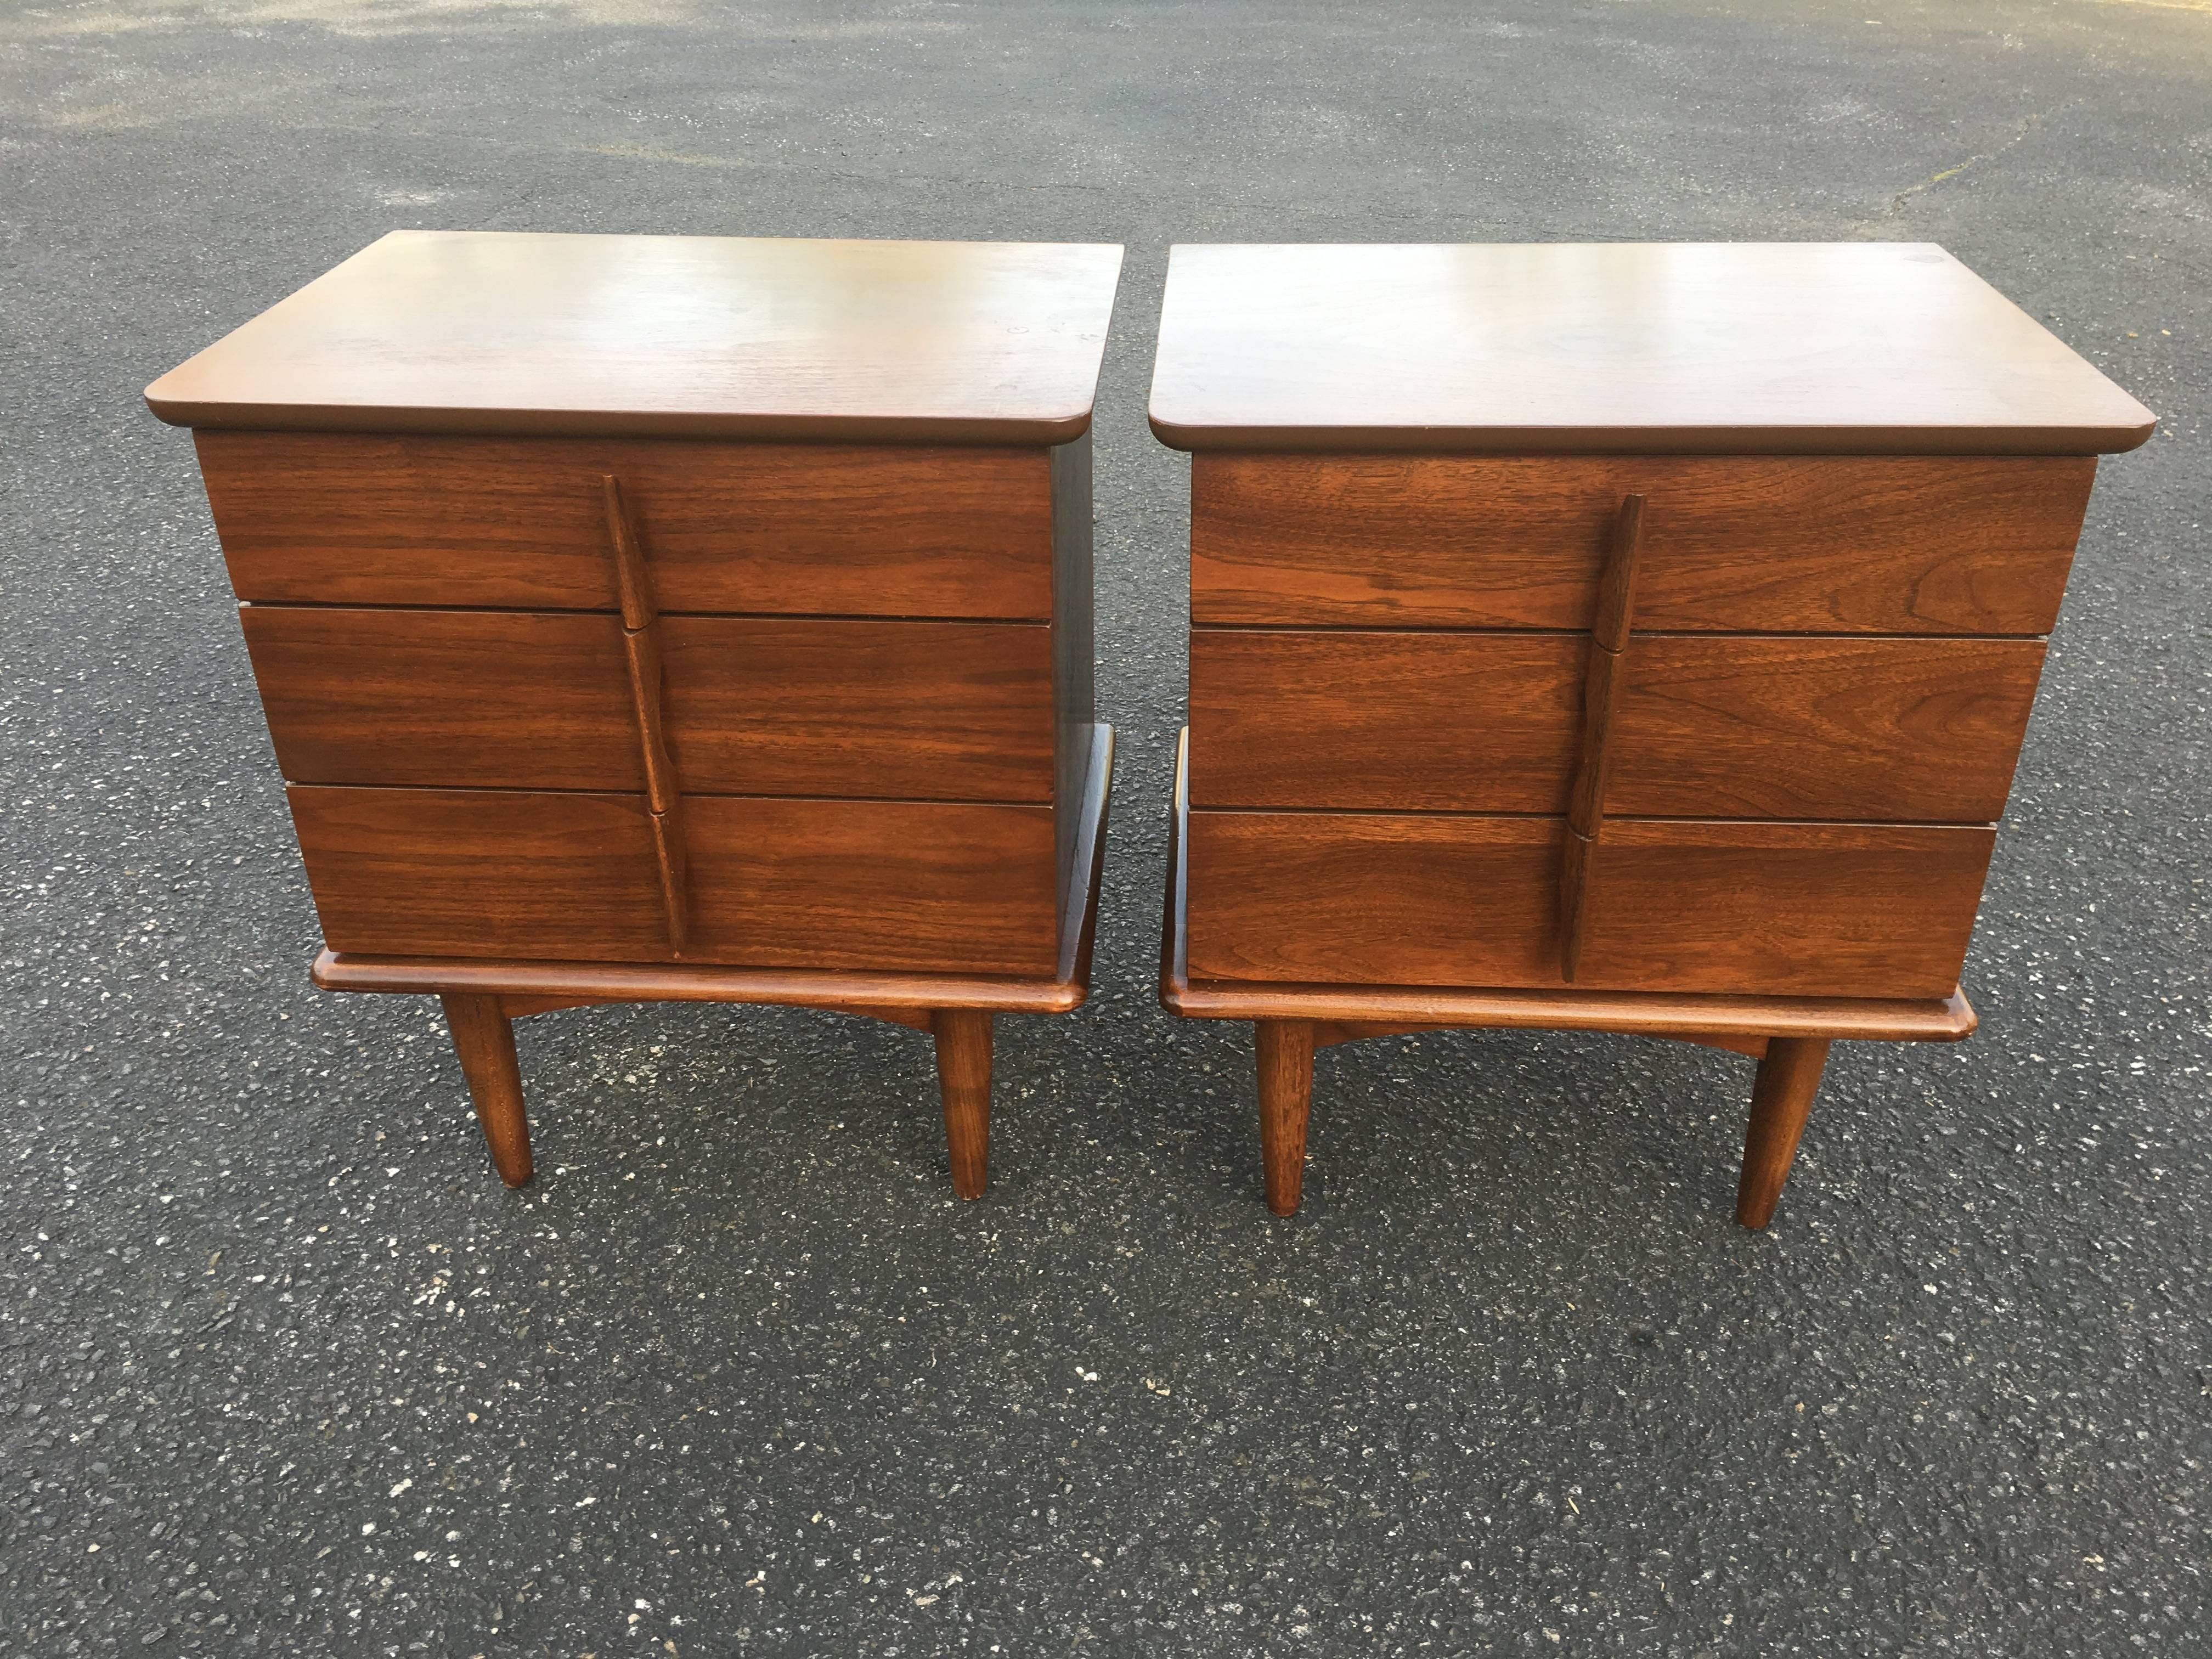 Pair of Mid-Century Modern nightstands. Sculptural handles adorn these Walnut beauties. They consist of three drawers each and have a composition banding below the wooden top. The small dot on the top right rear nightstand was wax and has been